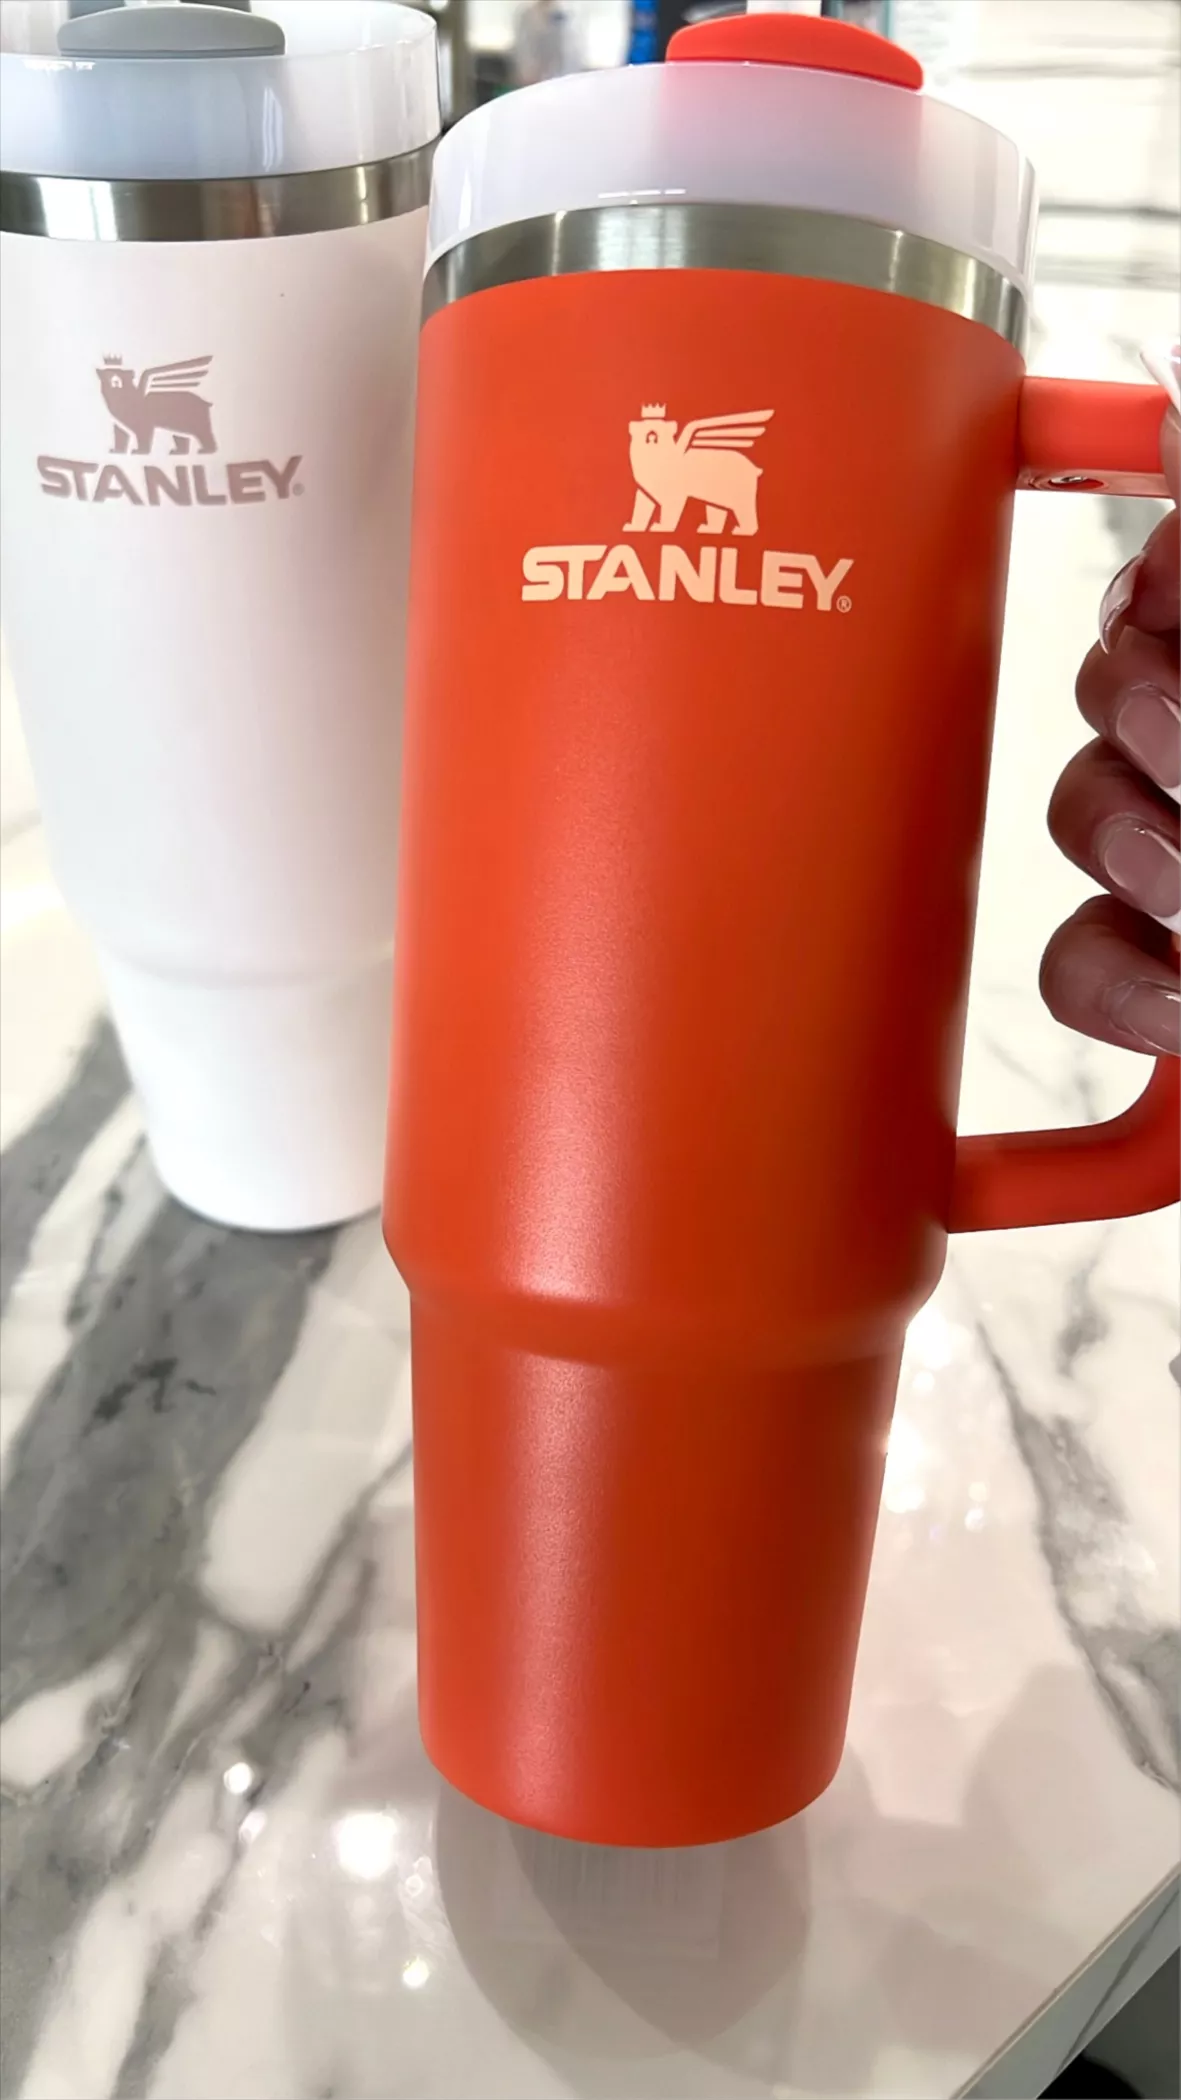 Stanley 30 oz. Quencher Tumbler curated on LTK